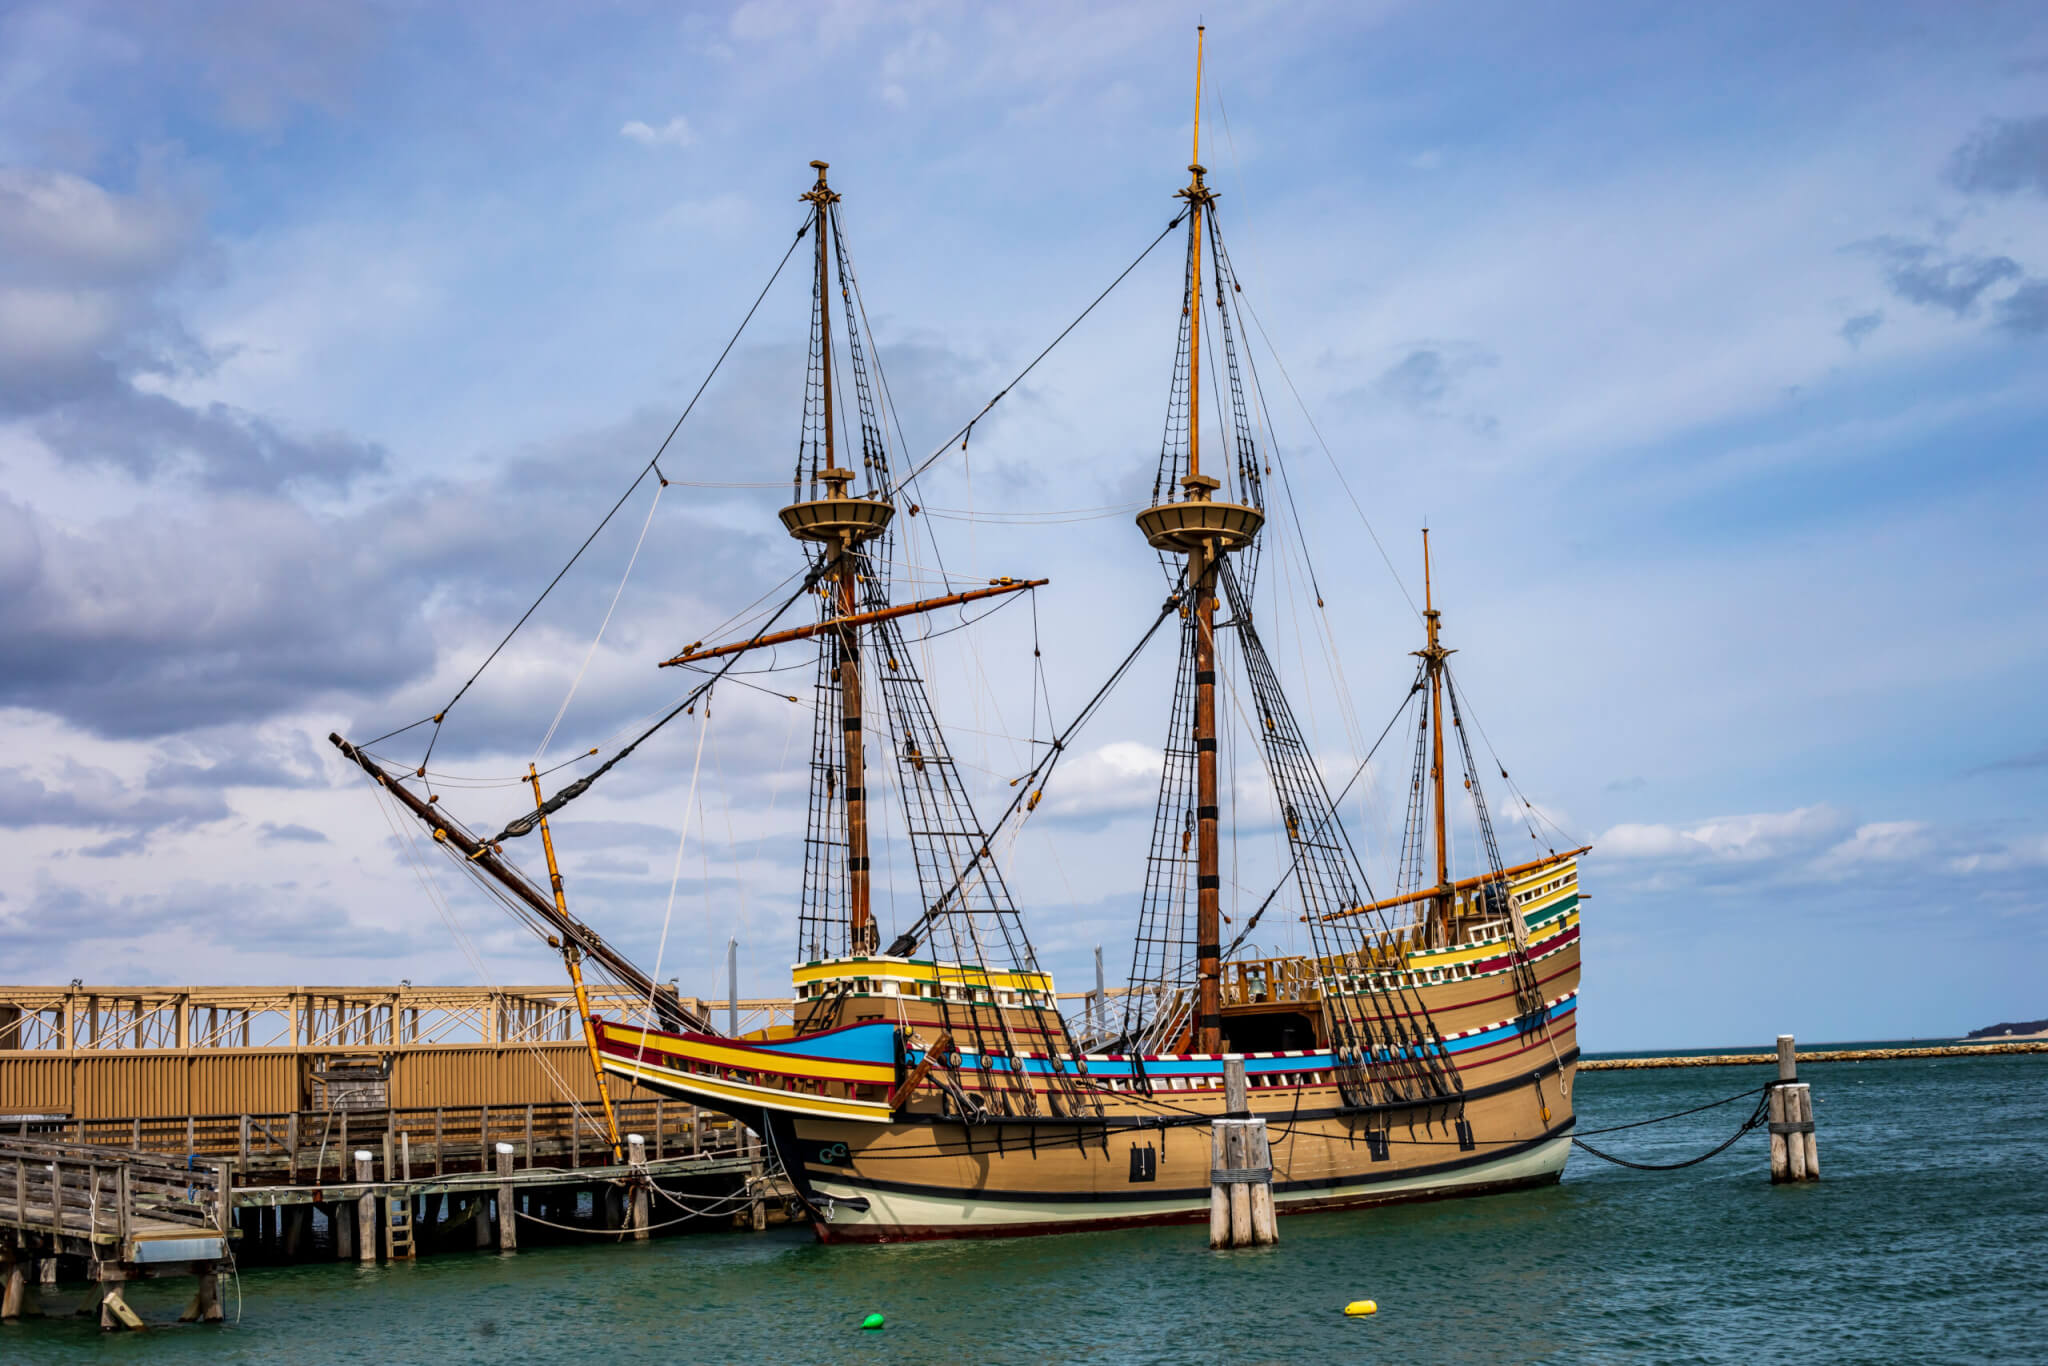 The Mayflower II ship in Plymouth.